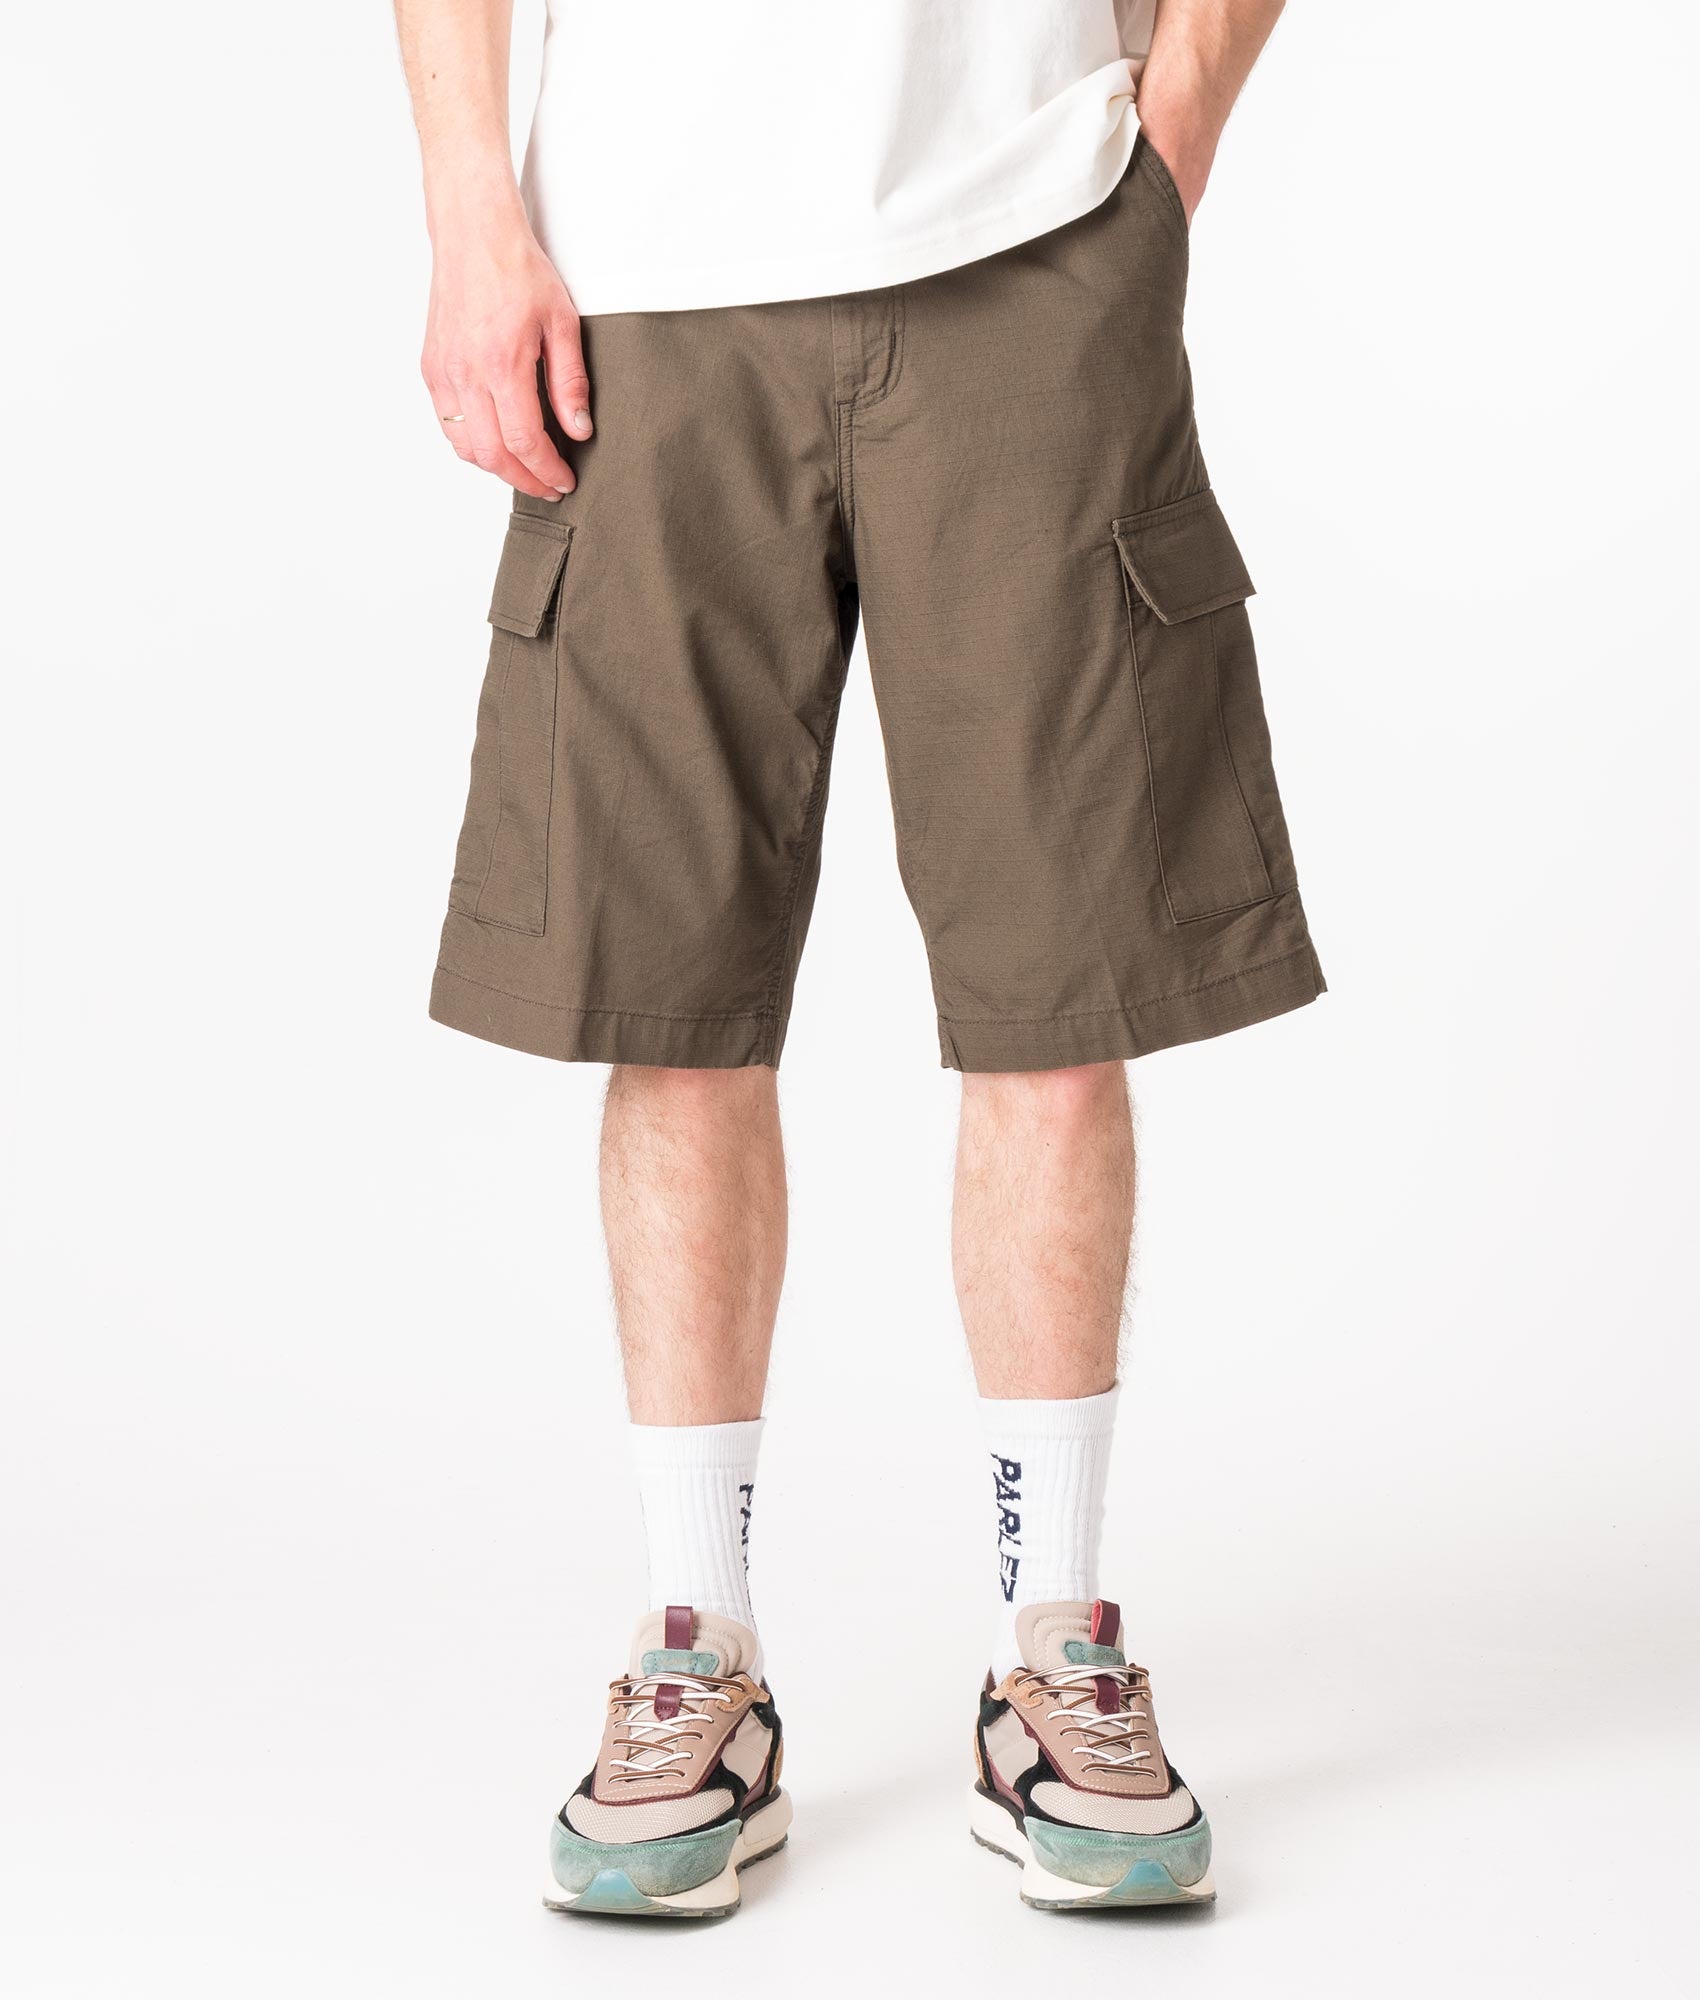 Carhartt WIP Mens Regular Fit Ripstop Cargo Shorts - Colour: 6302 Cypress - Size: 30W